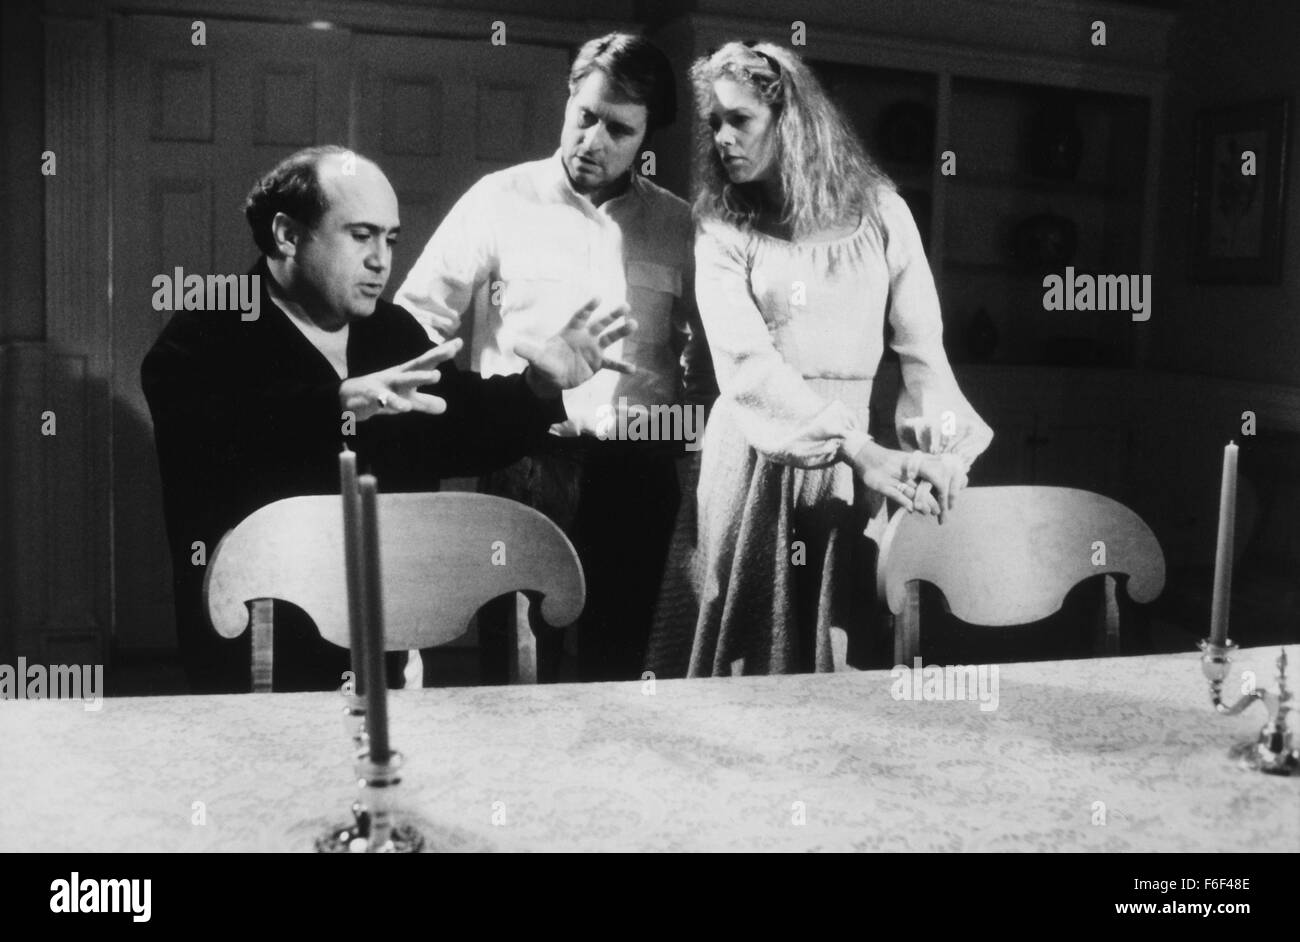 Jan. 1, 1980 - Danny Devito Directing Michael Douglas and Kathleen Turner On-Set of the Film, The War of the Roses, 1989 (Credit Image: c Glasshouse/Entertainment Pictures) Stock Photo